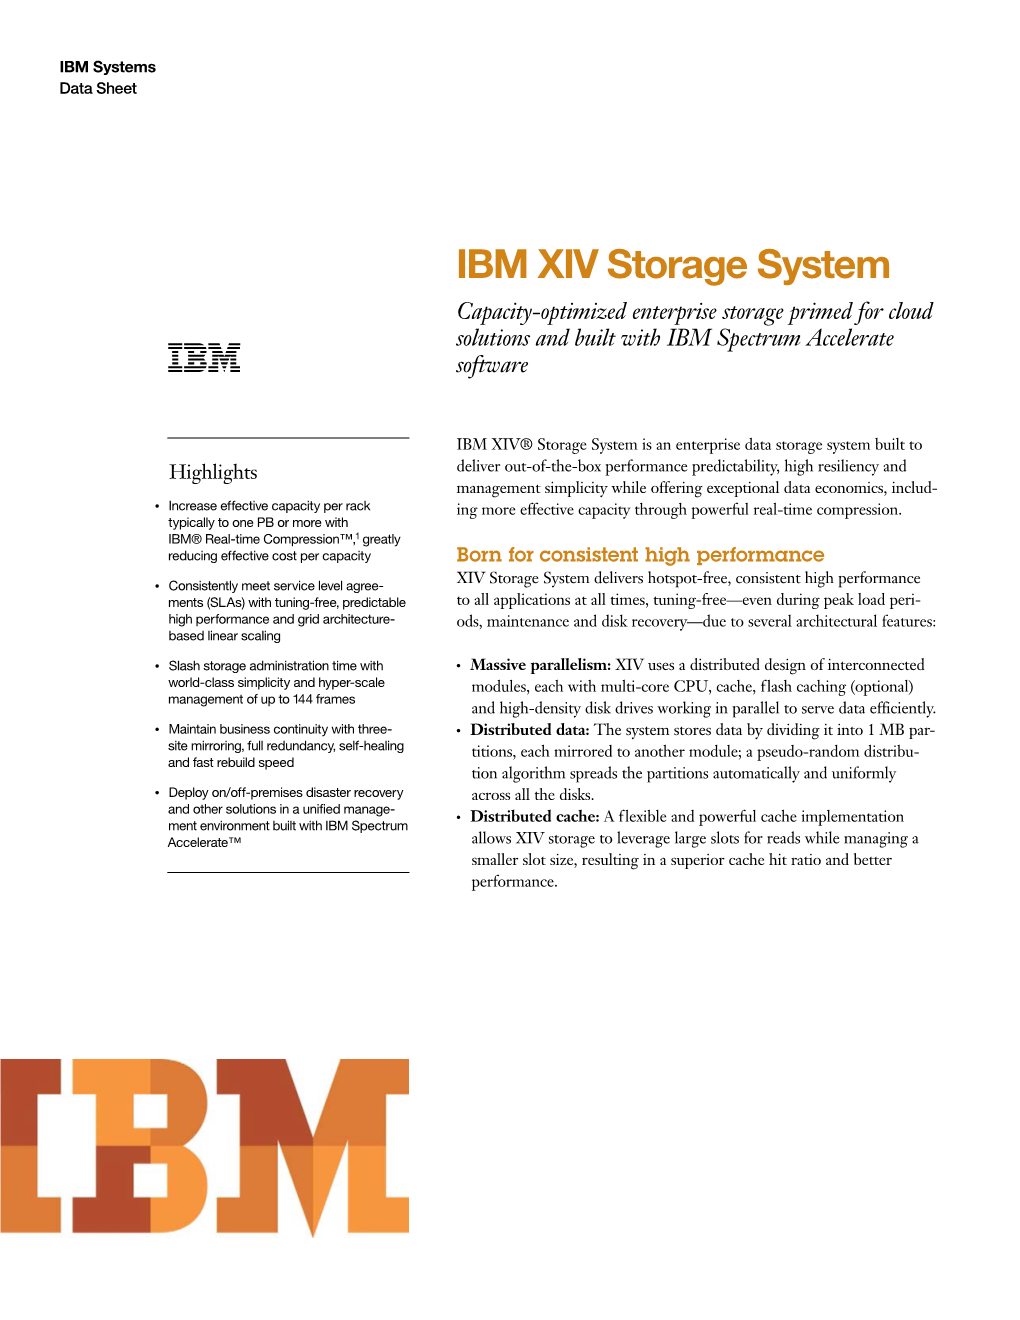 IBM XIV Storage System Capacity-Optimized Enterprise Storage Primed for Cloud Solutions and Built with IBM Spectrum Accelerate Software